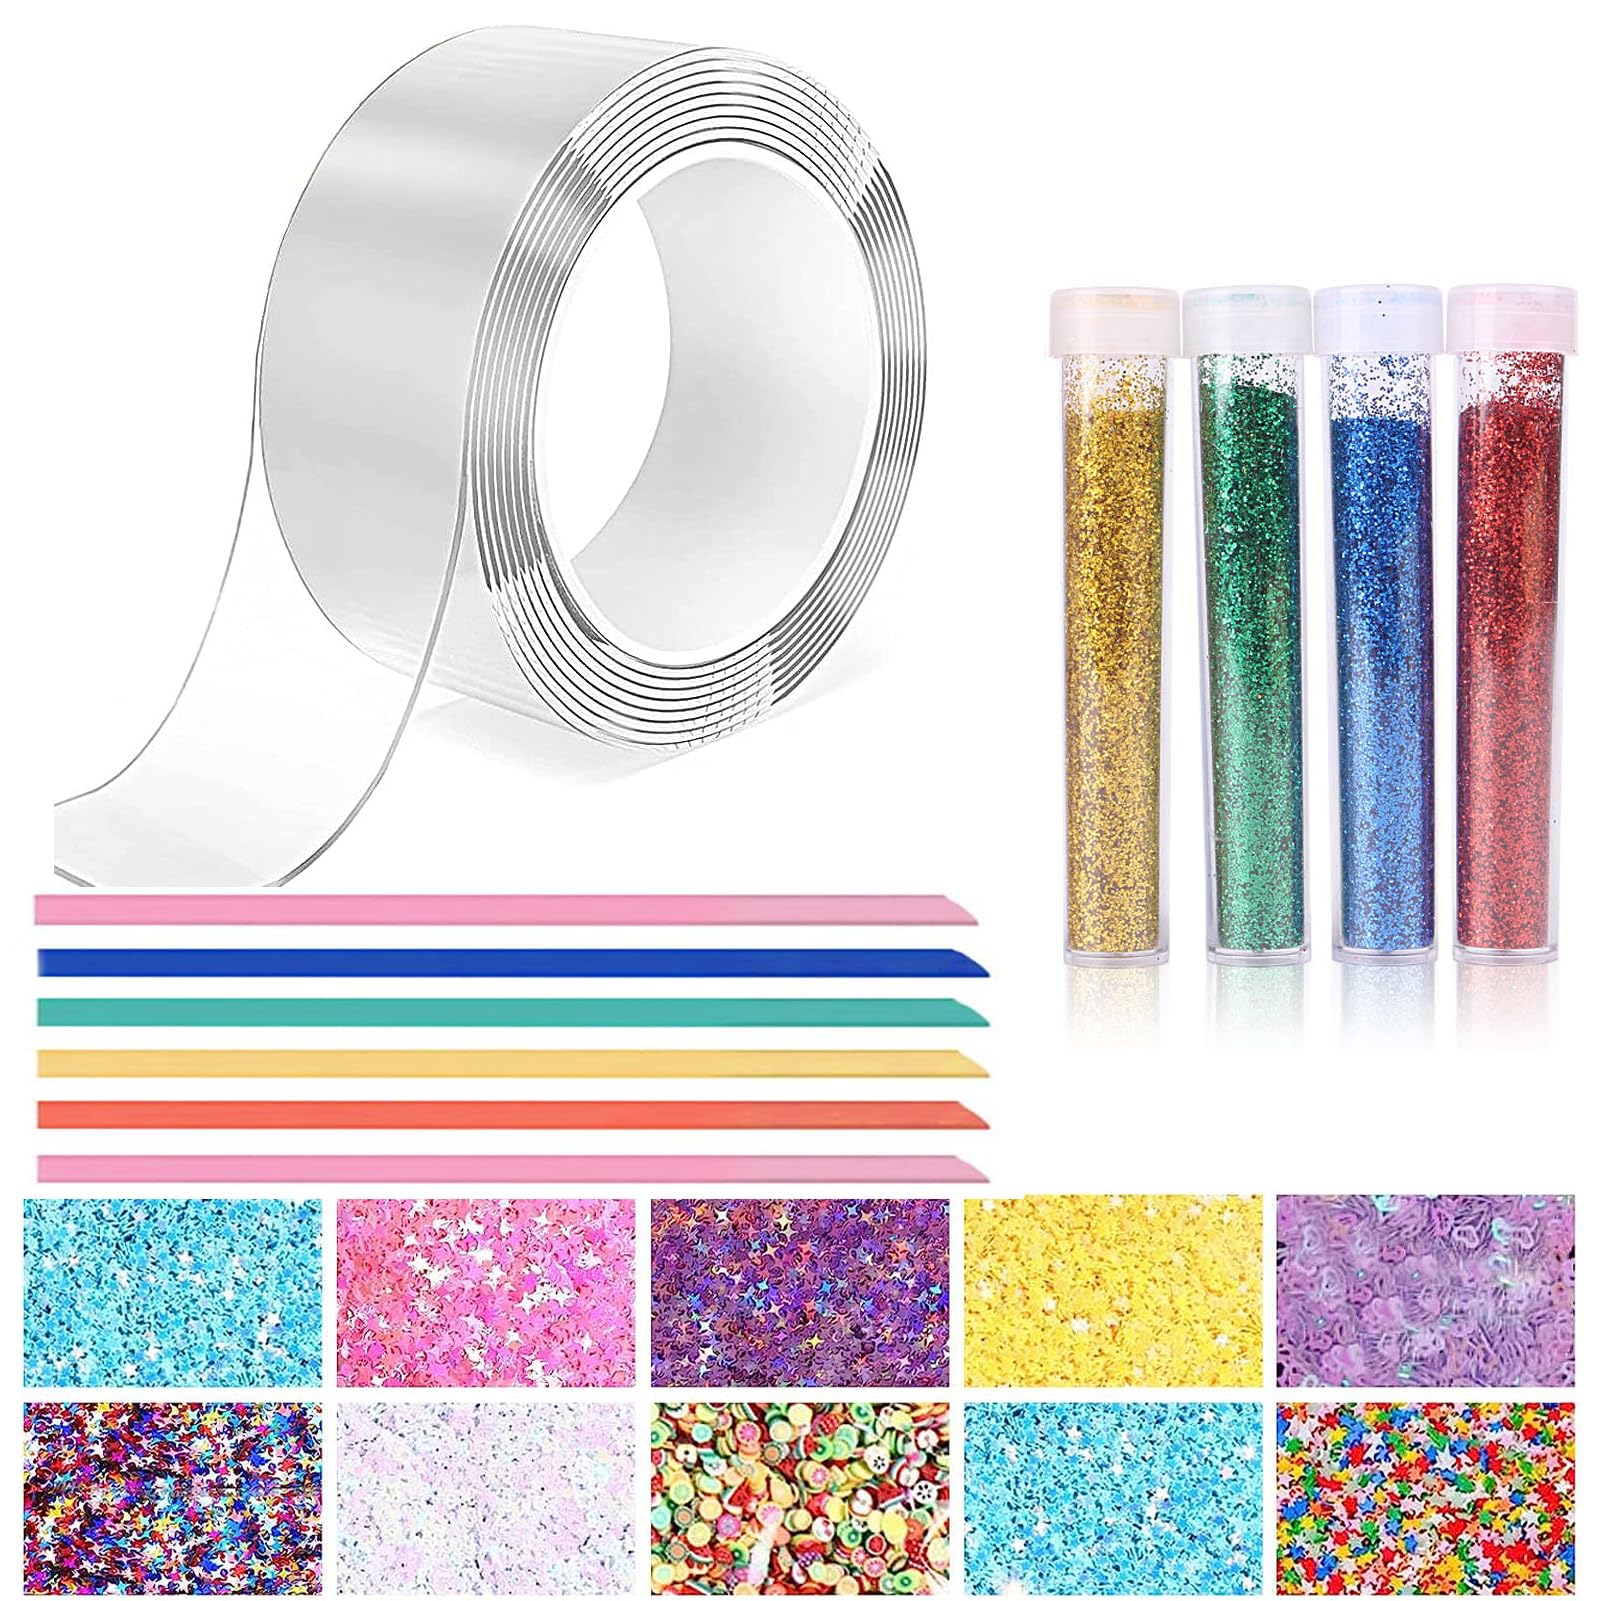 Nano Tape Bubble Kit DIY Set Nano Bubble Tape Toy Kit with Glitter Bubbles Balloon Double Sided Tape for Kids Girls Adult Party Favors Gifts Fidget Toy Craft (Accessories1)